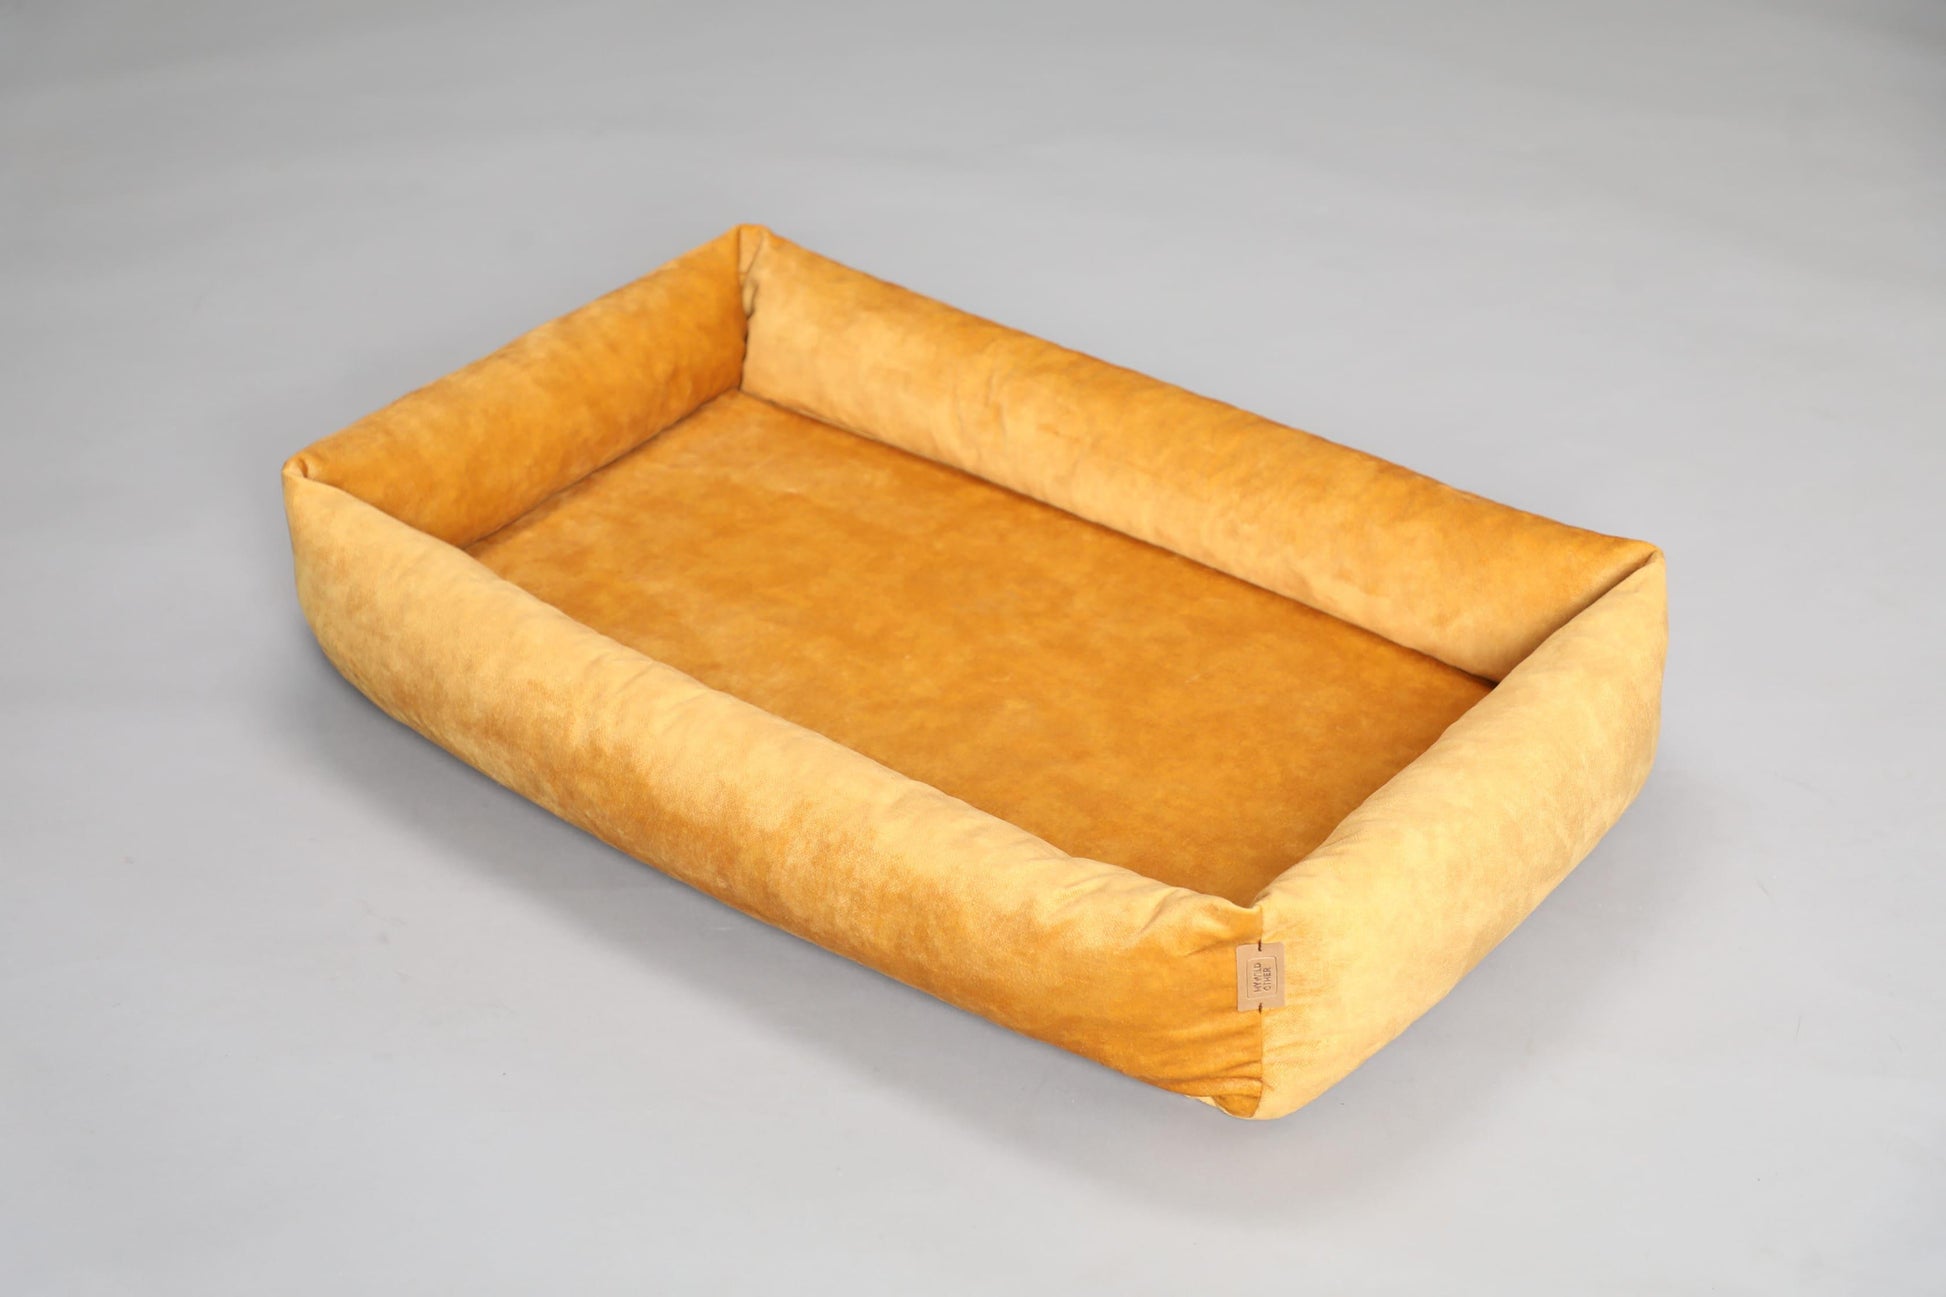 Premium dog bed with sides | 2-sided | AMBER YELLOW - premium dog goods handmade in Europe by animalistus